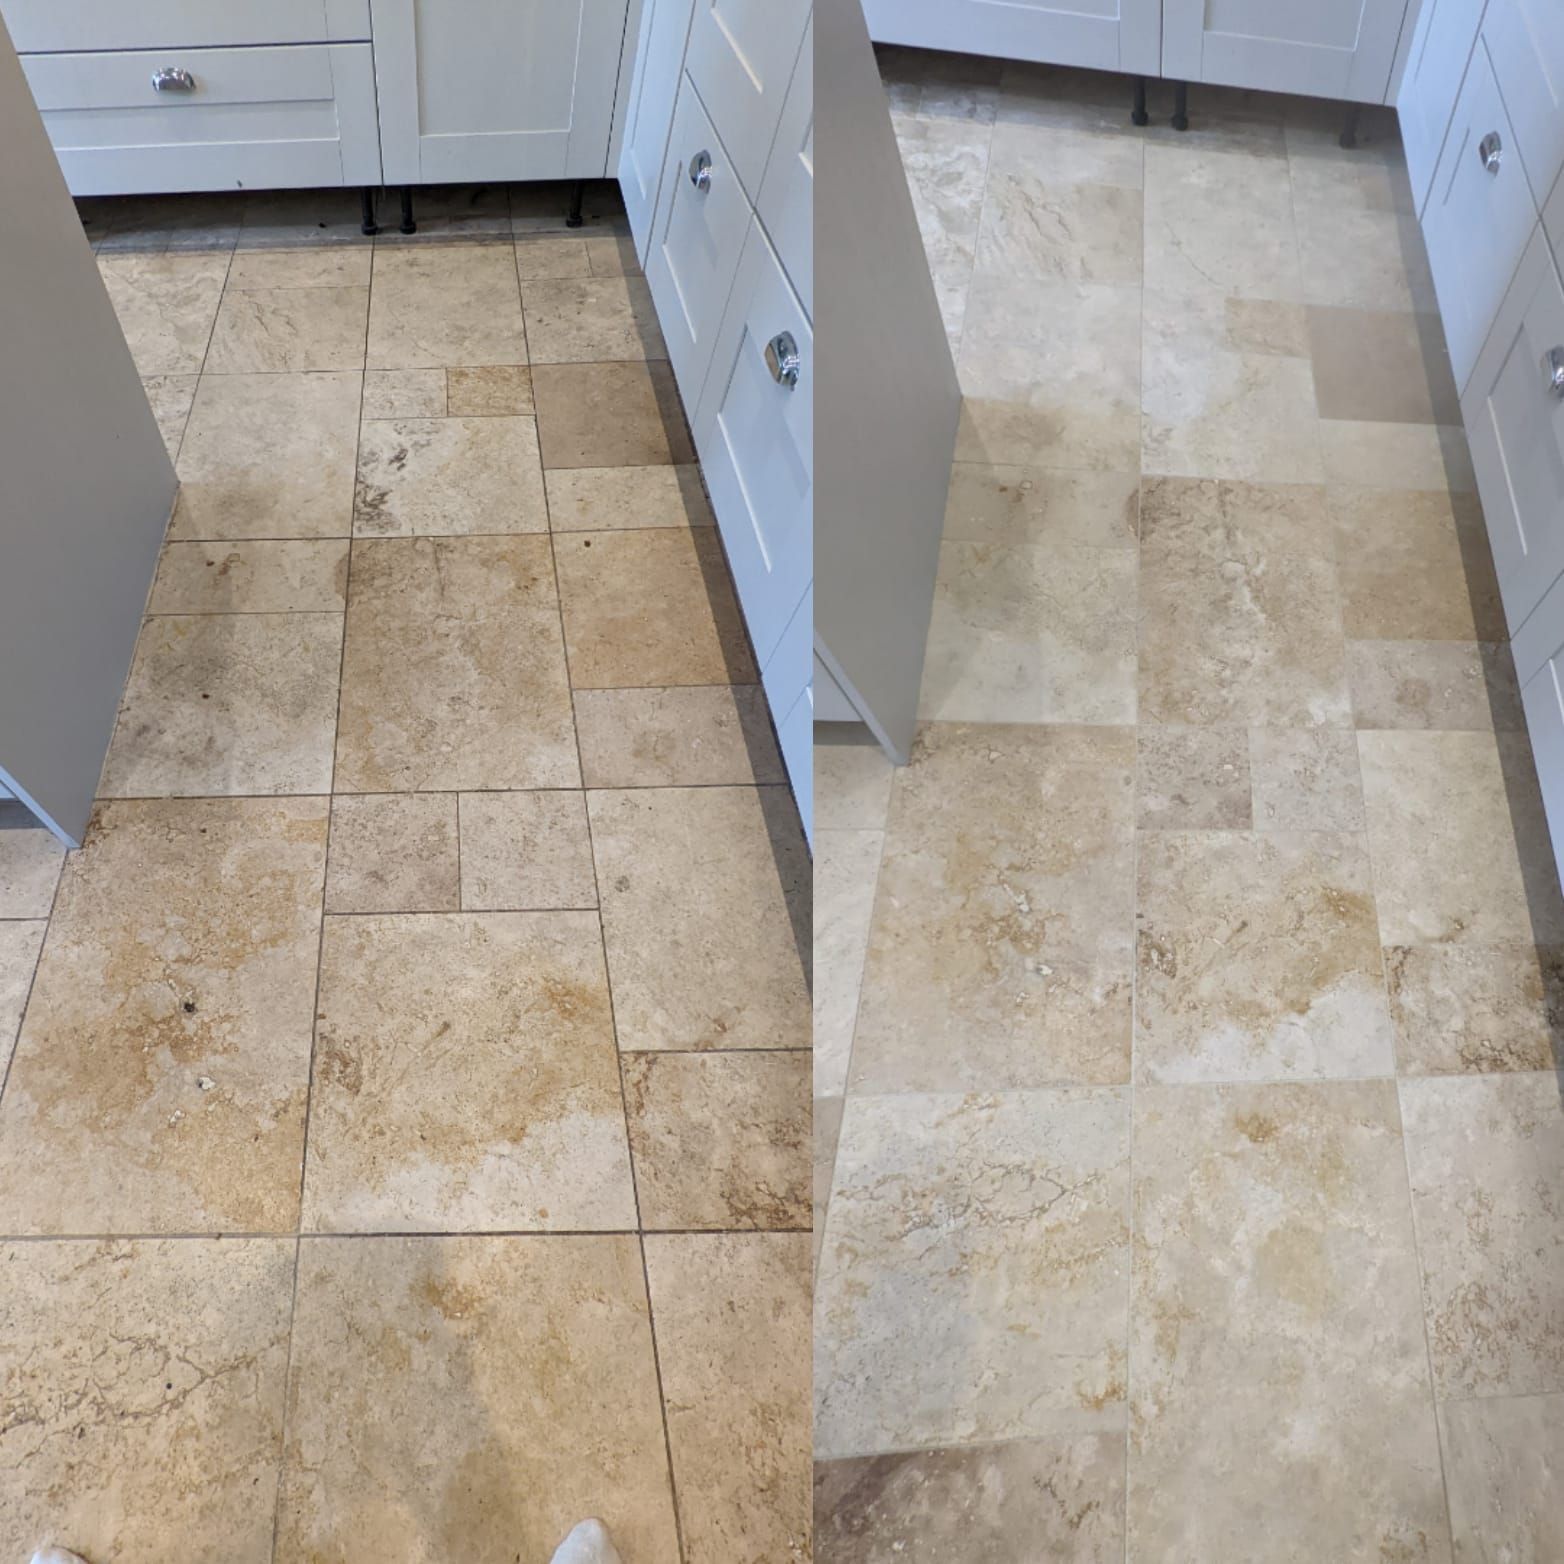 THE CLEANING AND POLISHING PROCESS FOR TRAVERTINE AND LIMESTONE FLOORS IN GREATER MANCHESTER